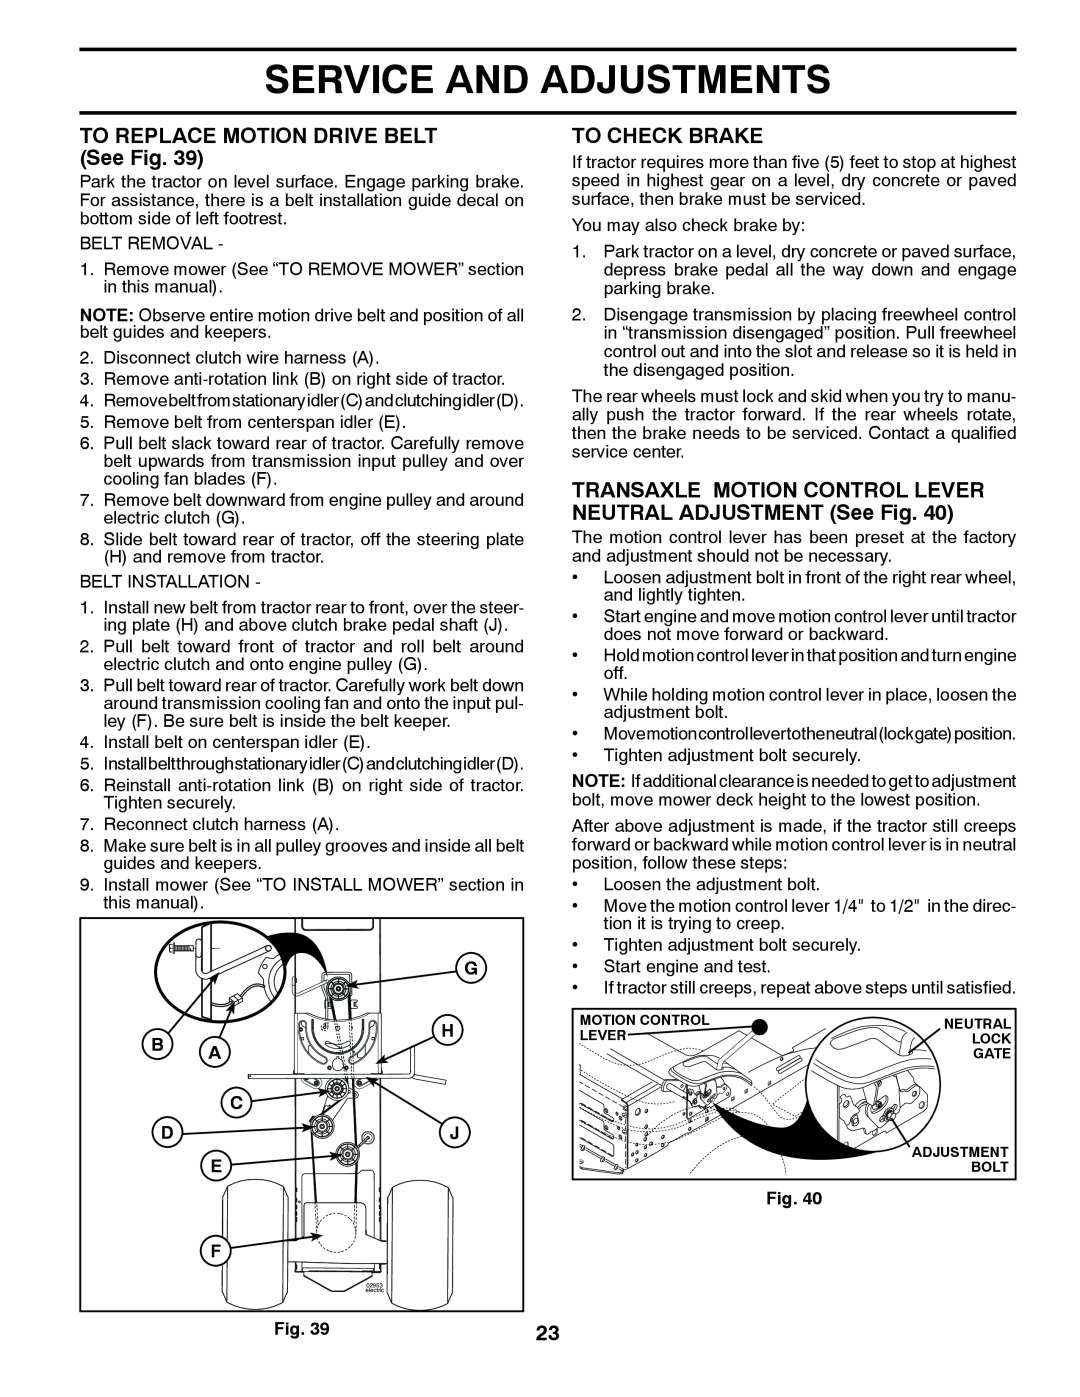 Poulan 96042011101, 436155 manual TO REPLACE MOTION DRIVE BELT See Fig, To Check Brake, Service And Adjustments 